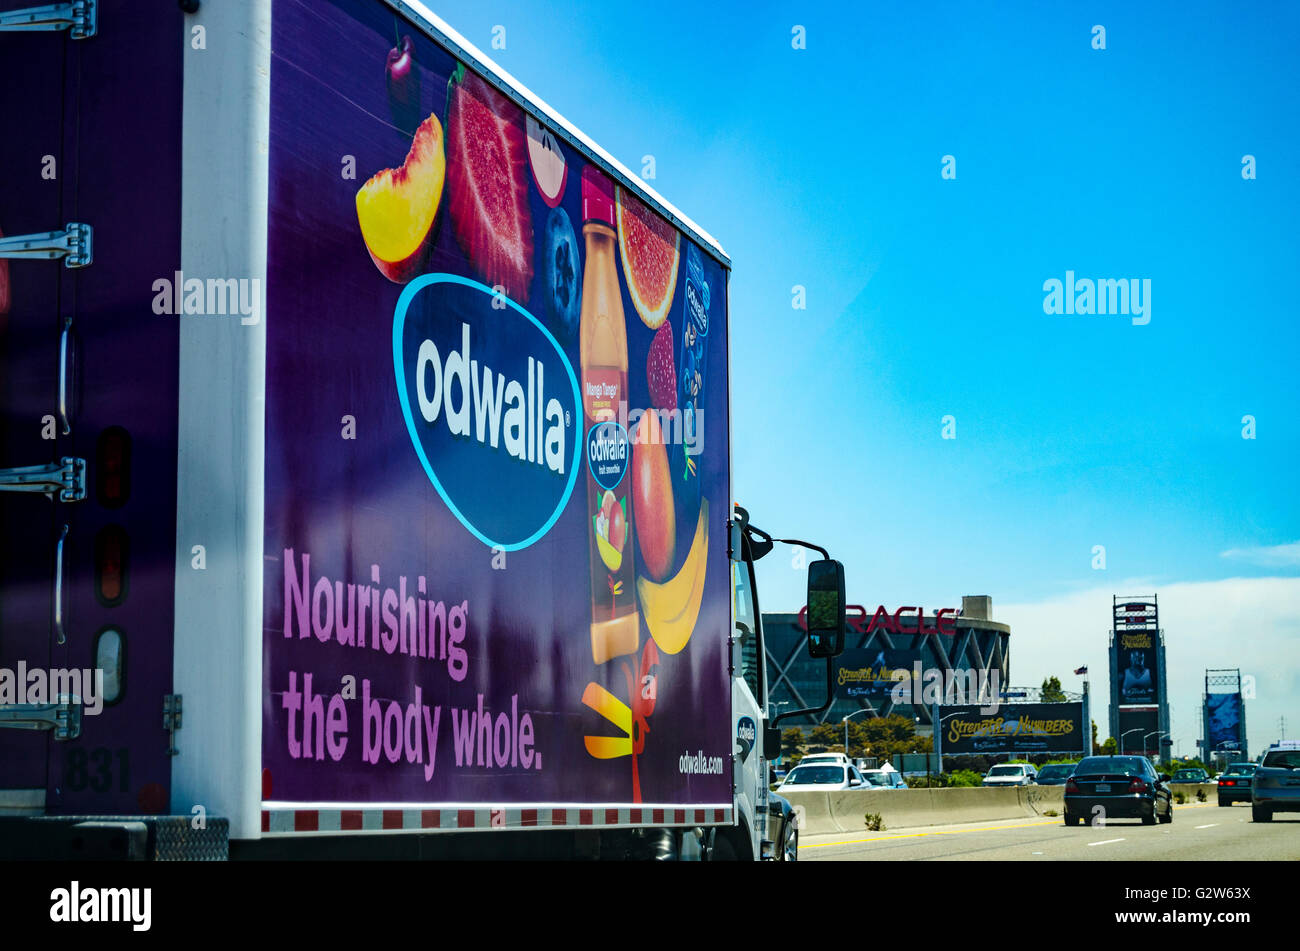 An Odwalla truck in Oakland California near the Oracle arena on Interstate 880 Stock Photo